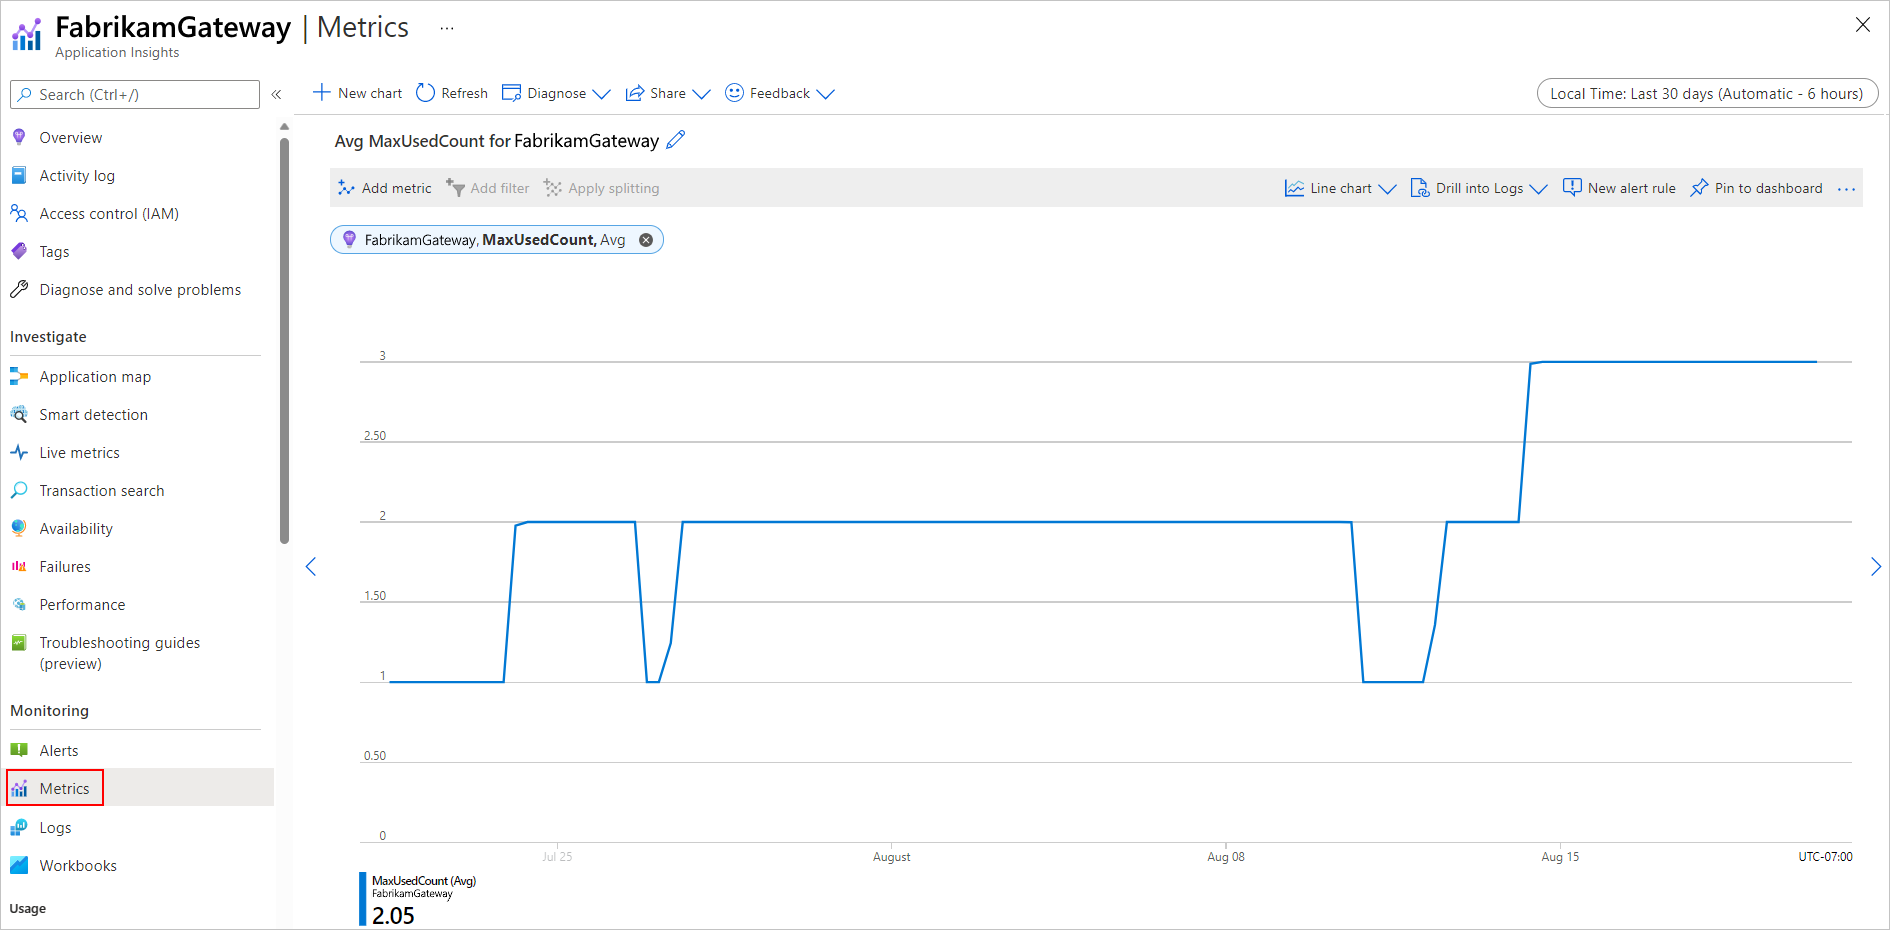 Screenshot showing Application Insights with the results in chart format.